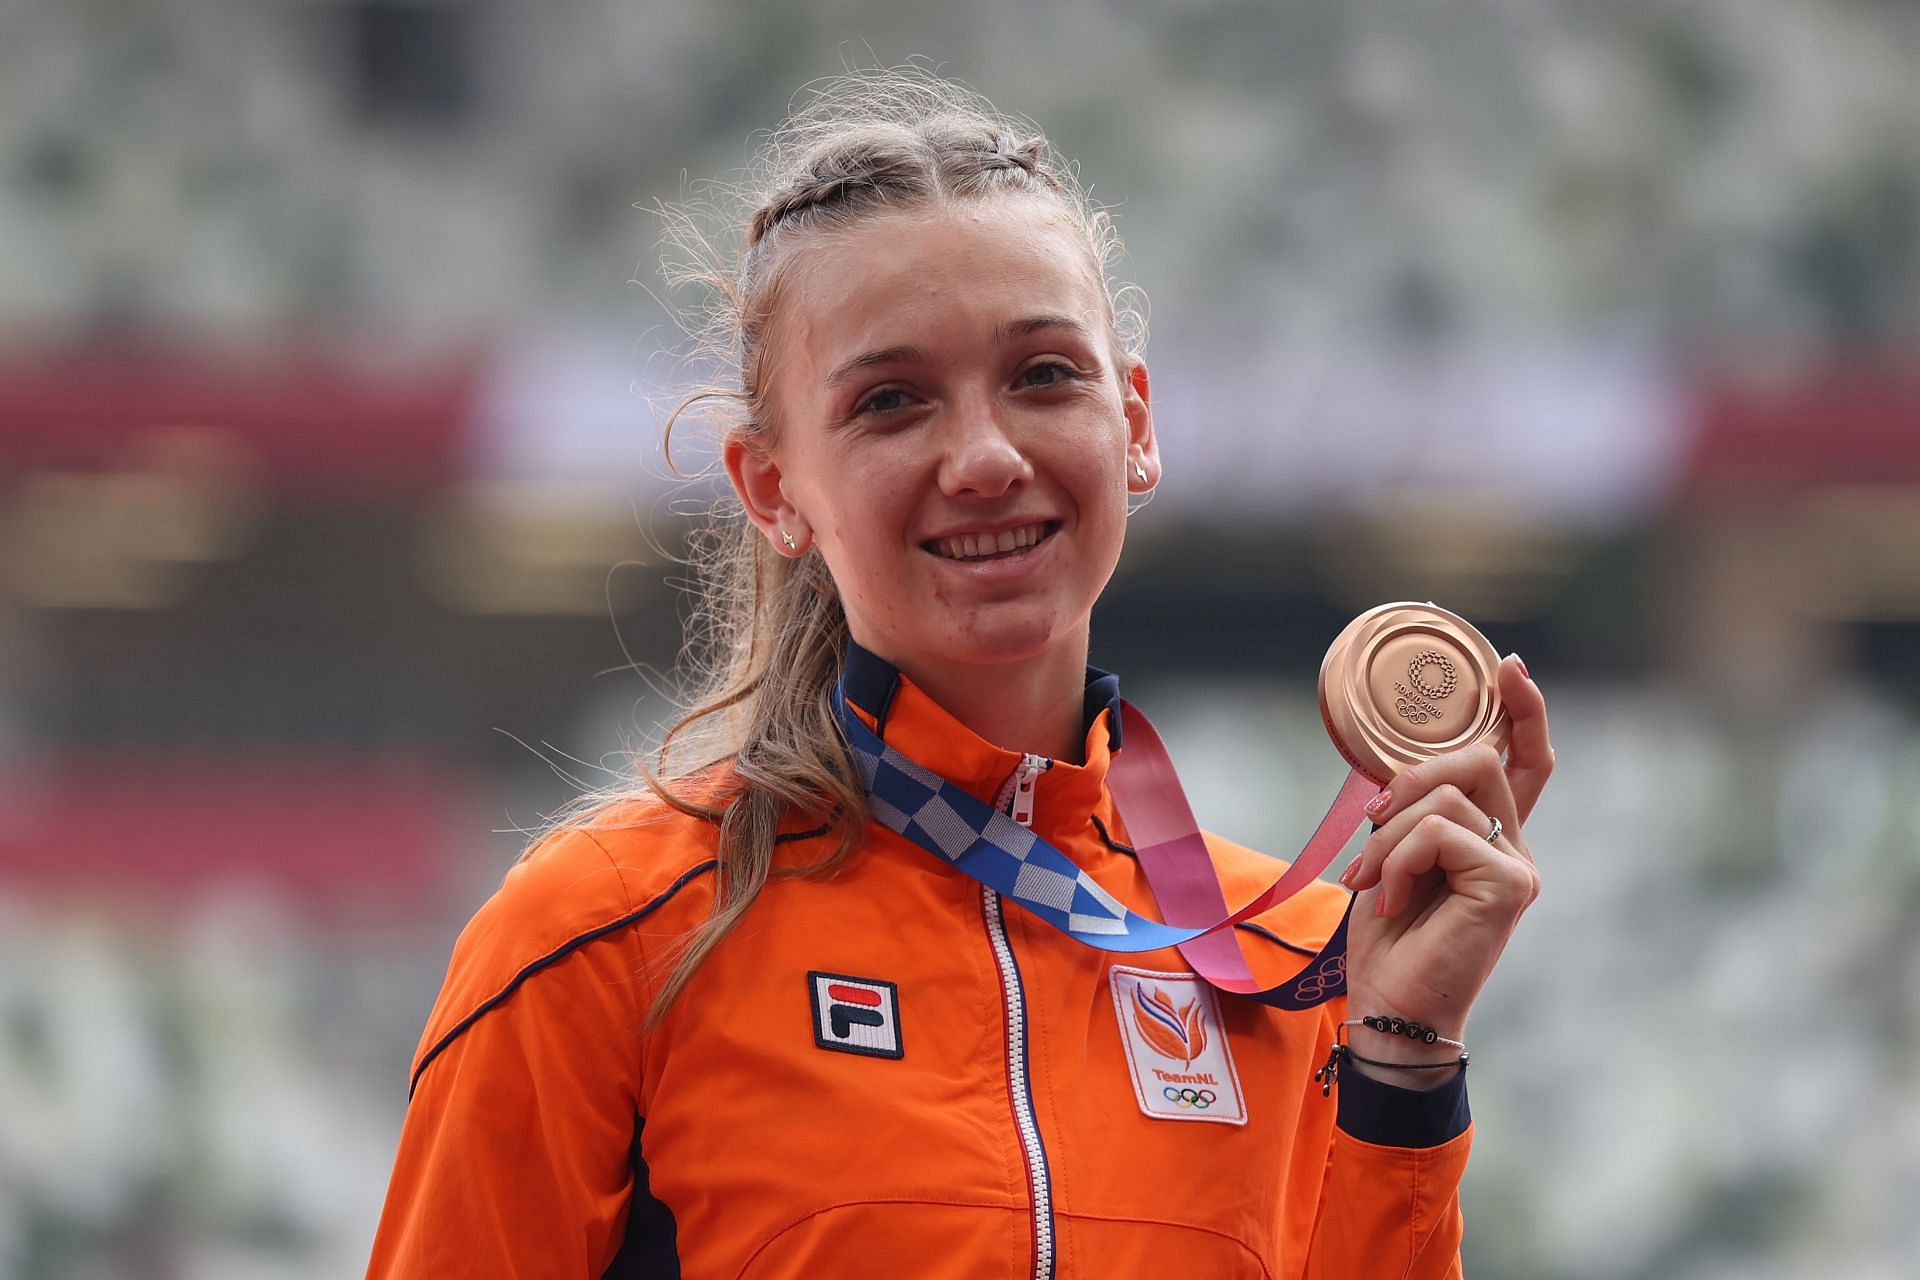 Bronze medalist Femke Bol of Team Netherlands poses during the medal ceremony for the Women&#039;s 400m Hurdles Final on day twelve of the Tokyo 2020 Olympic Games at Olympic Stadium on August 04, 2021 in Tokyo, Japan. (Photo by Christian Petersen/Getty Images)